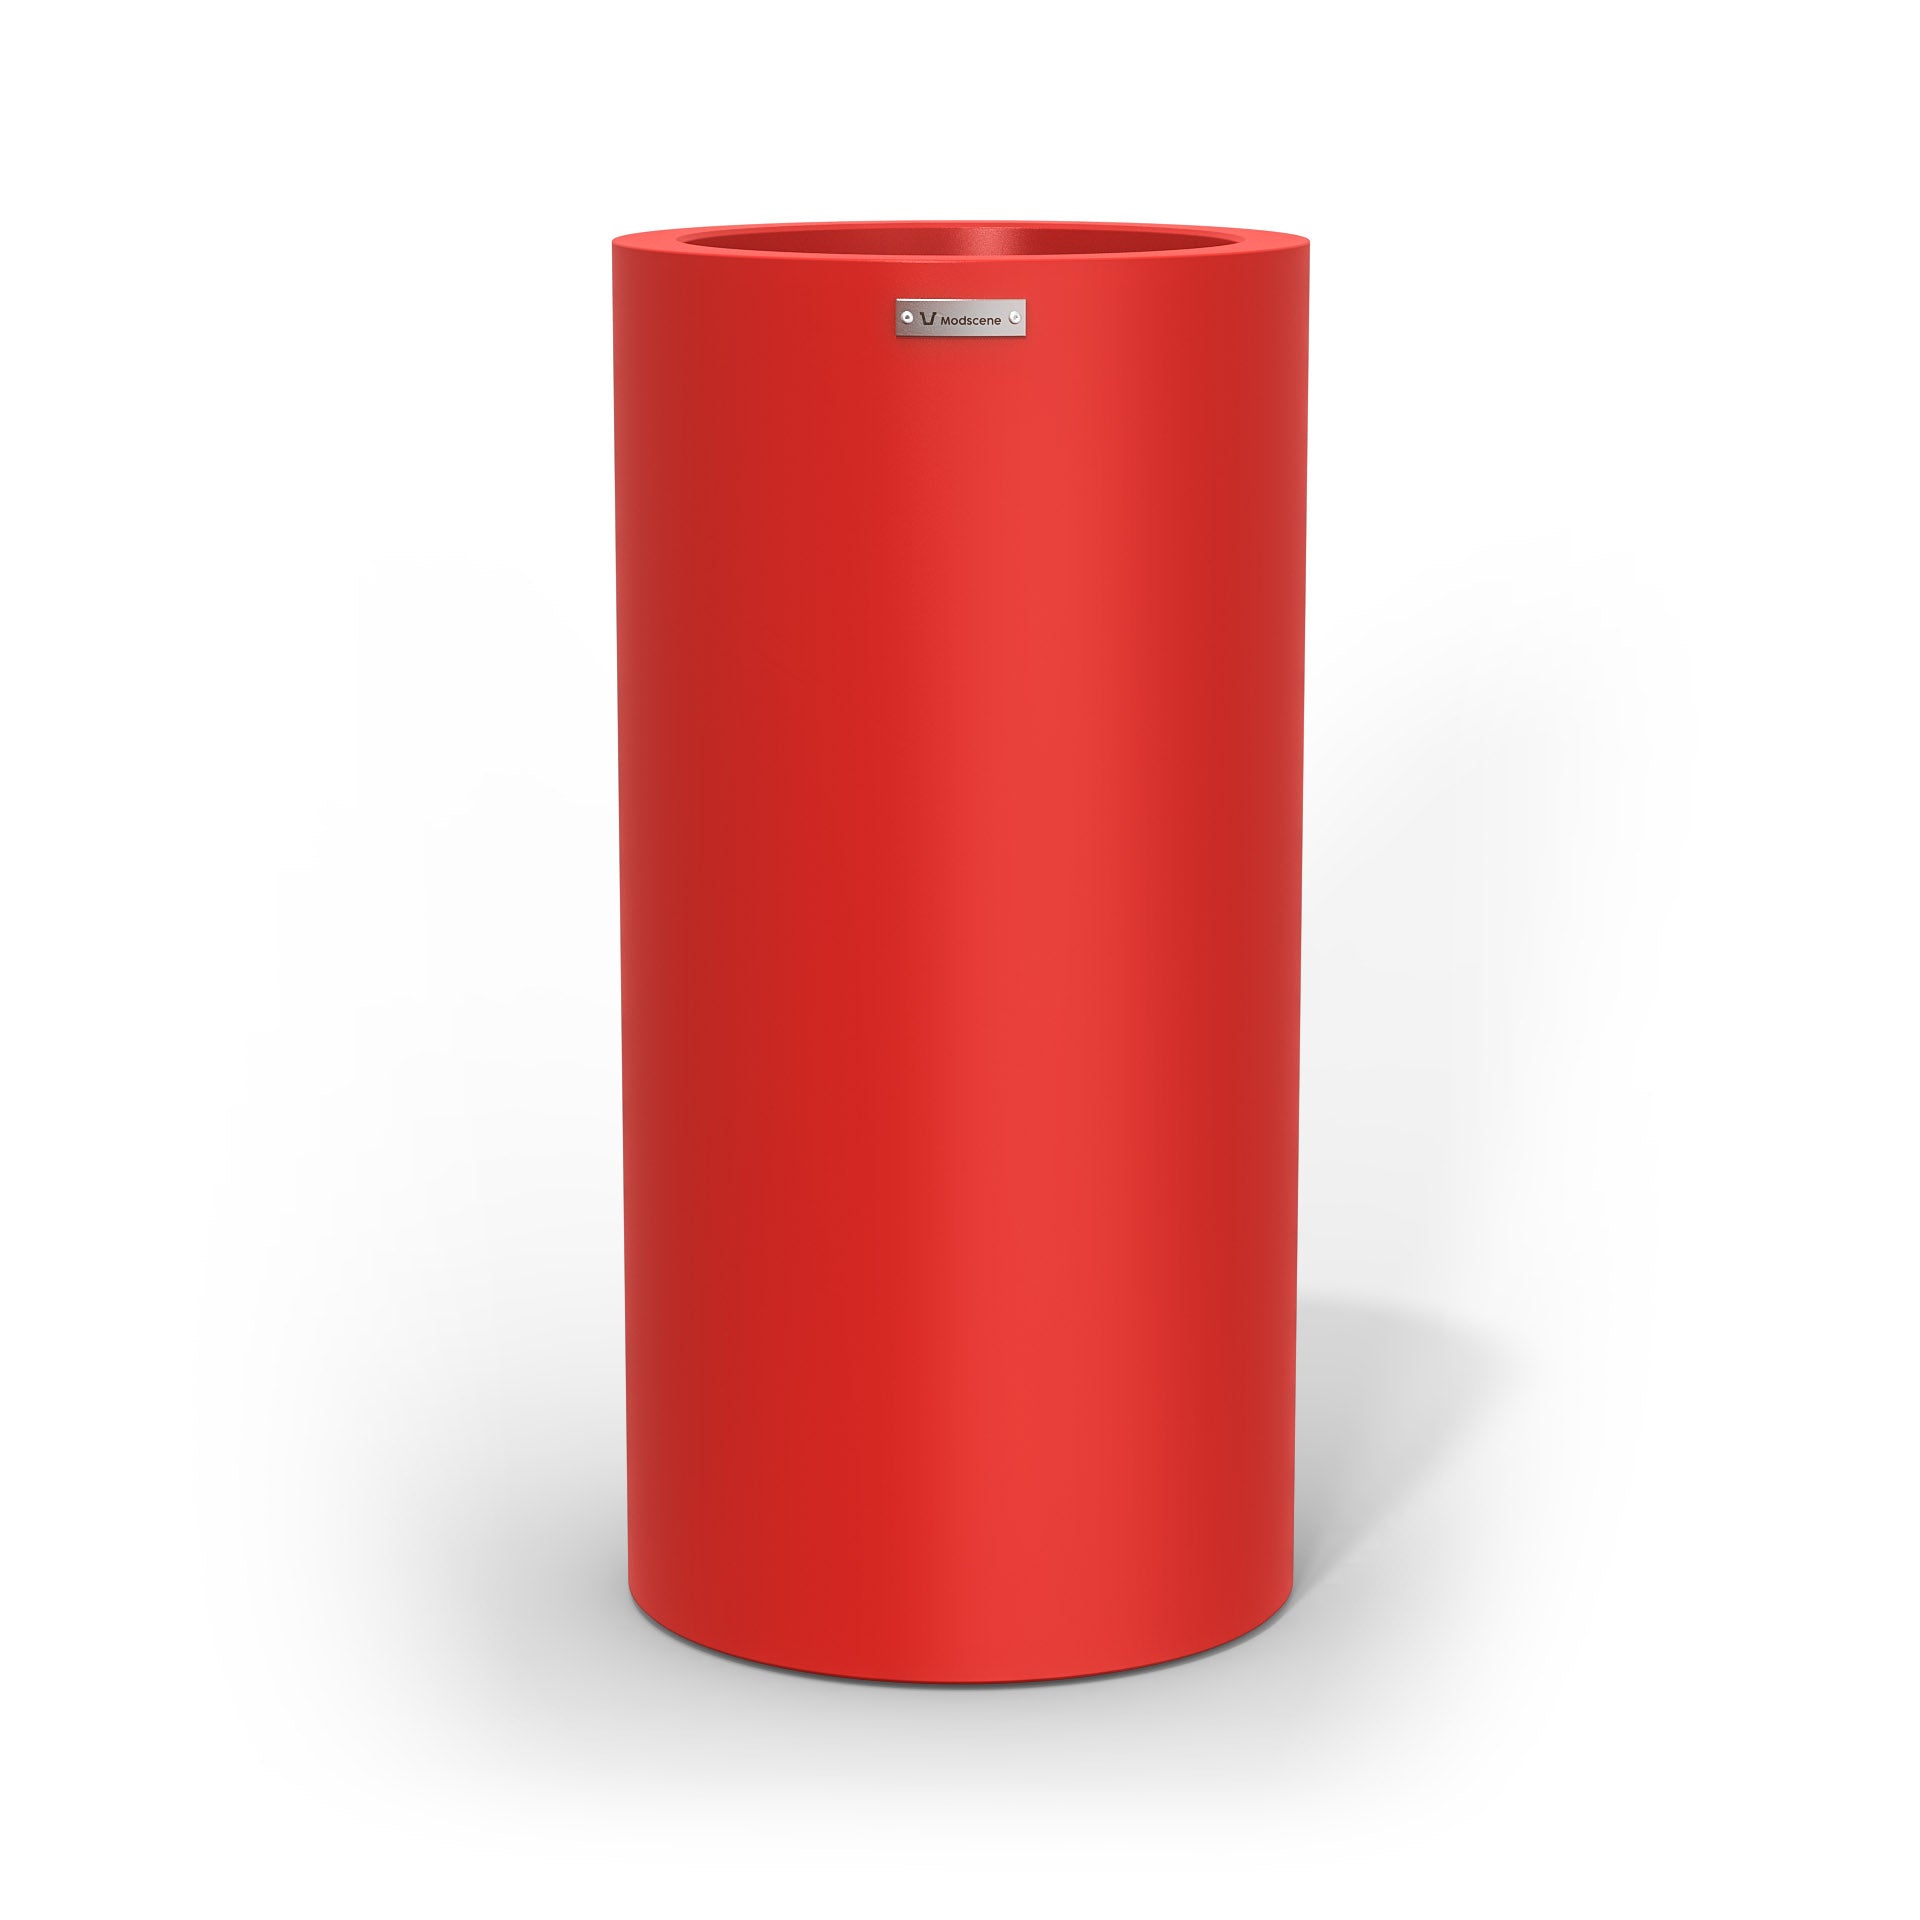 A tall cylinder shaped planter pot in a red colour made by Modscene.